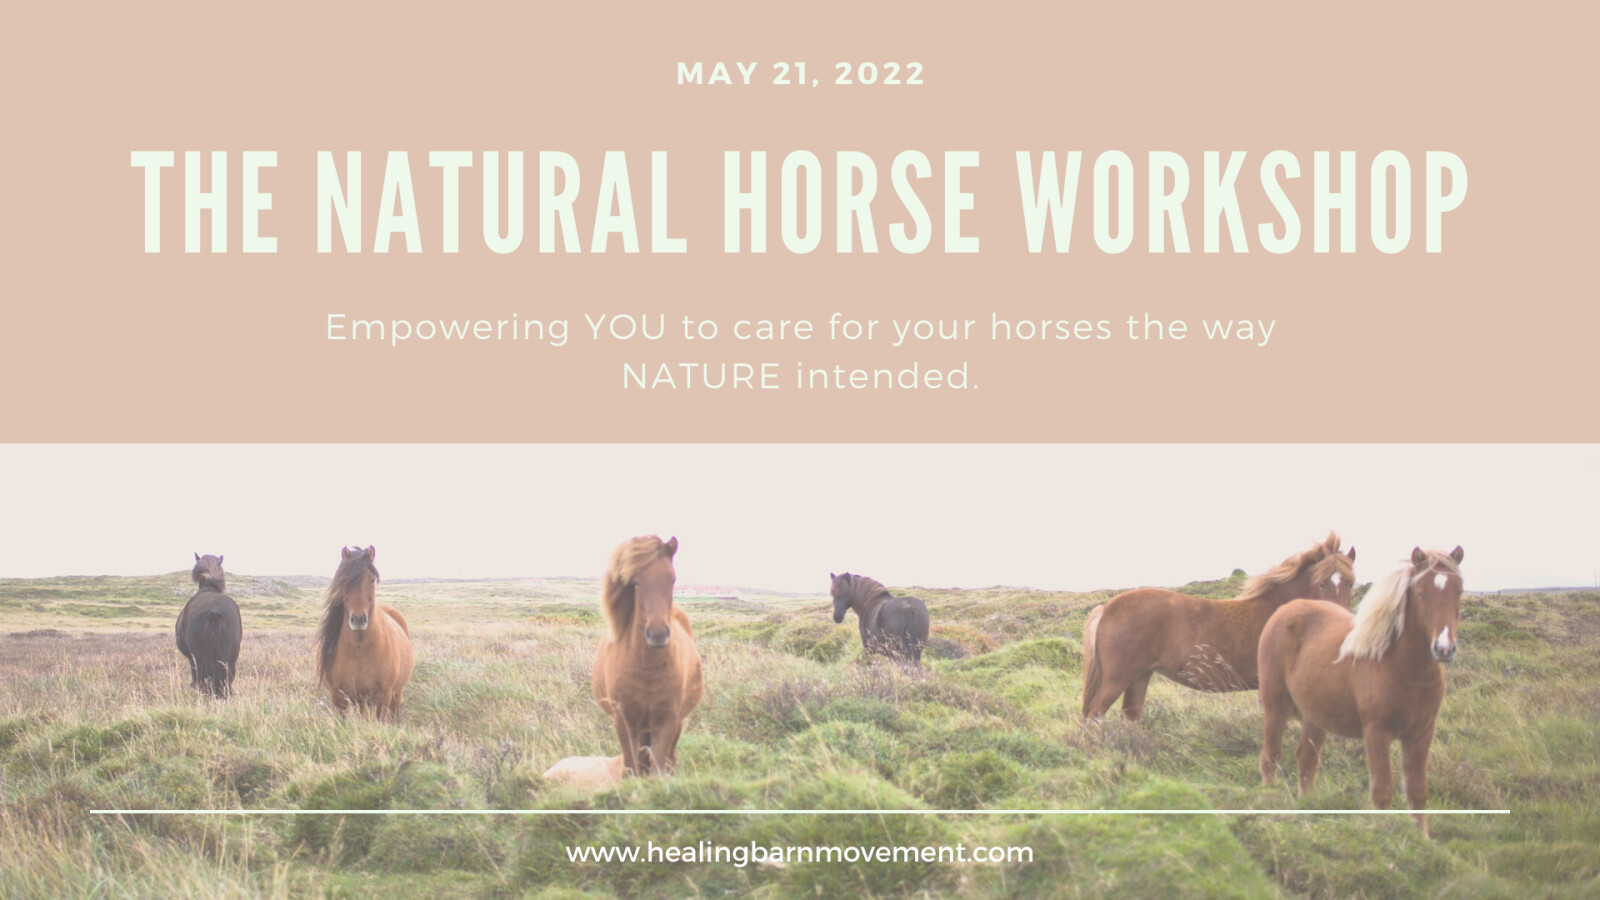 The Natural Horse Workshop was a success!